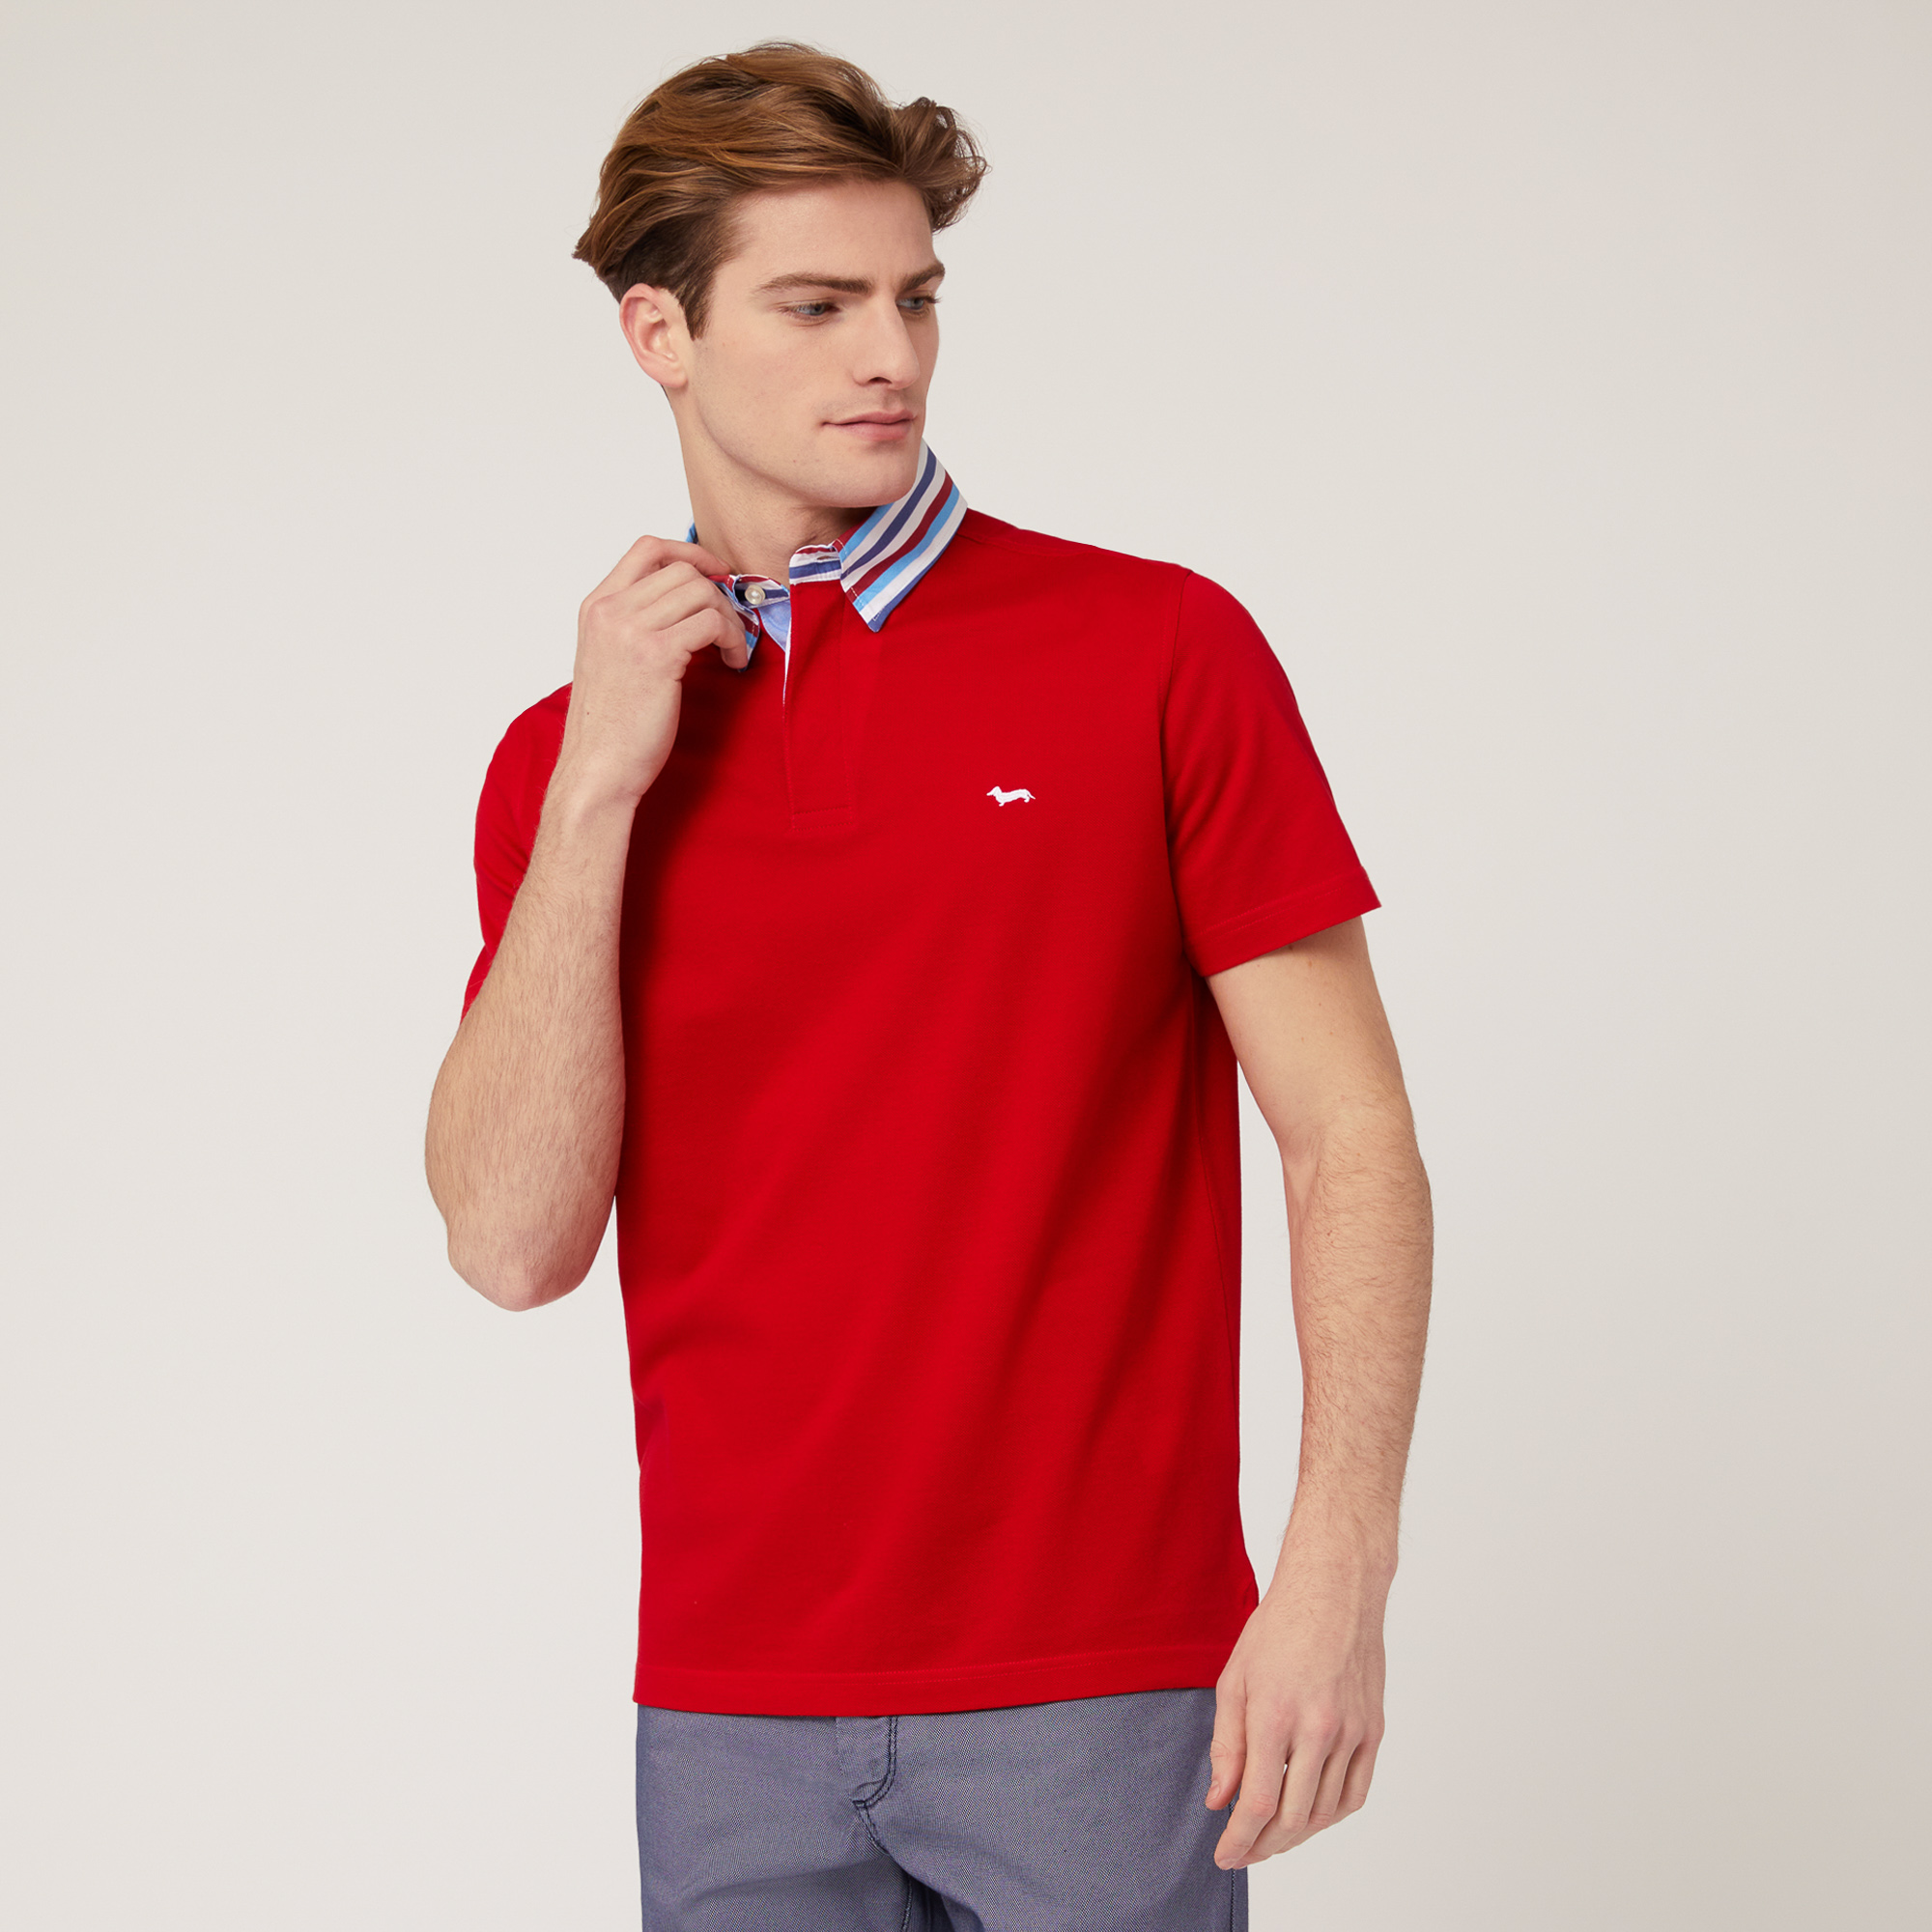 Vietri Polo Shirt with Multicolor Collar, Red, large